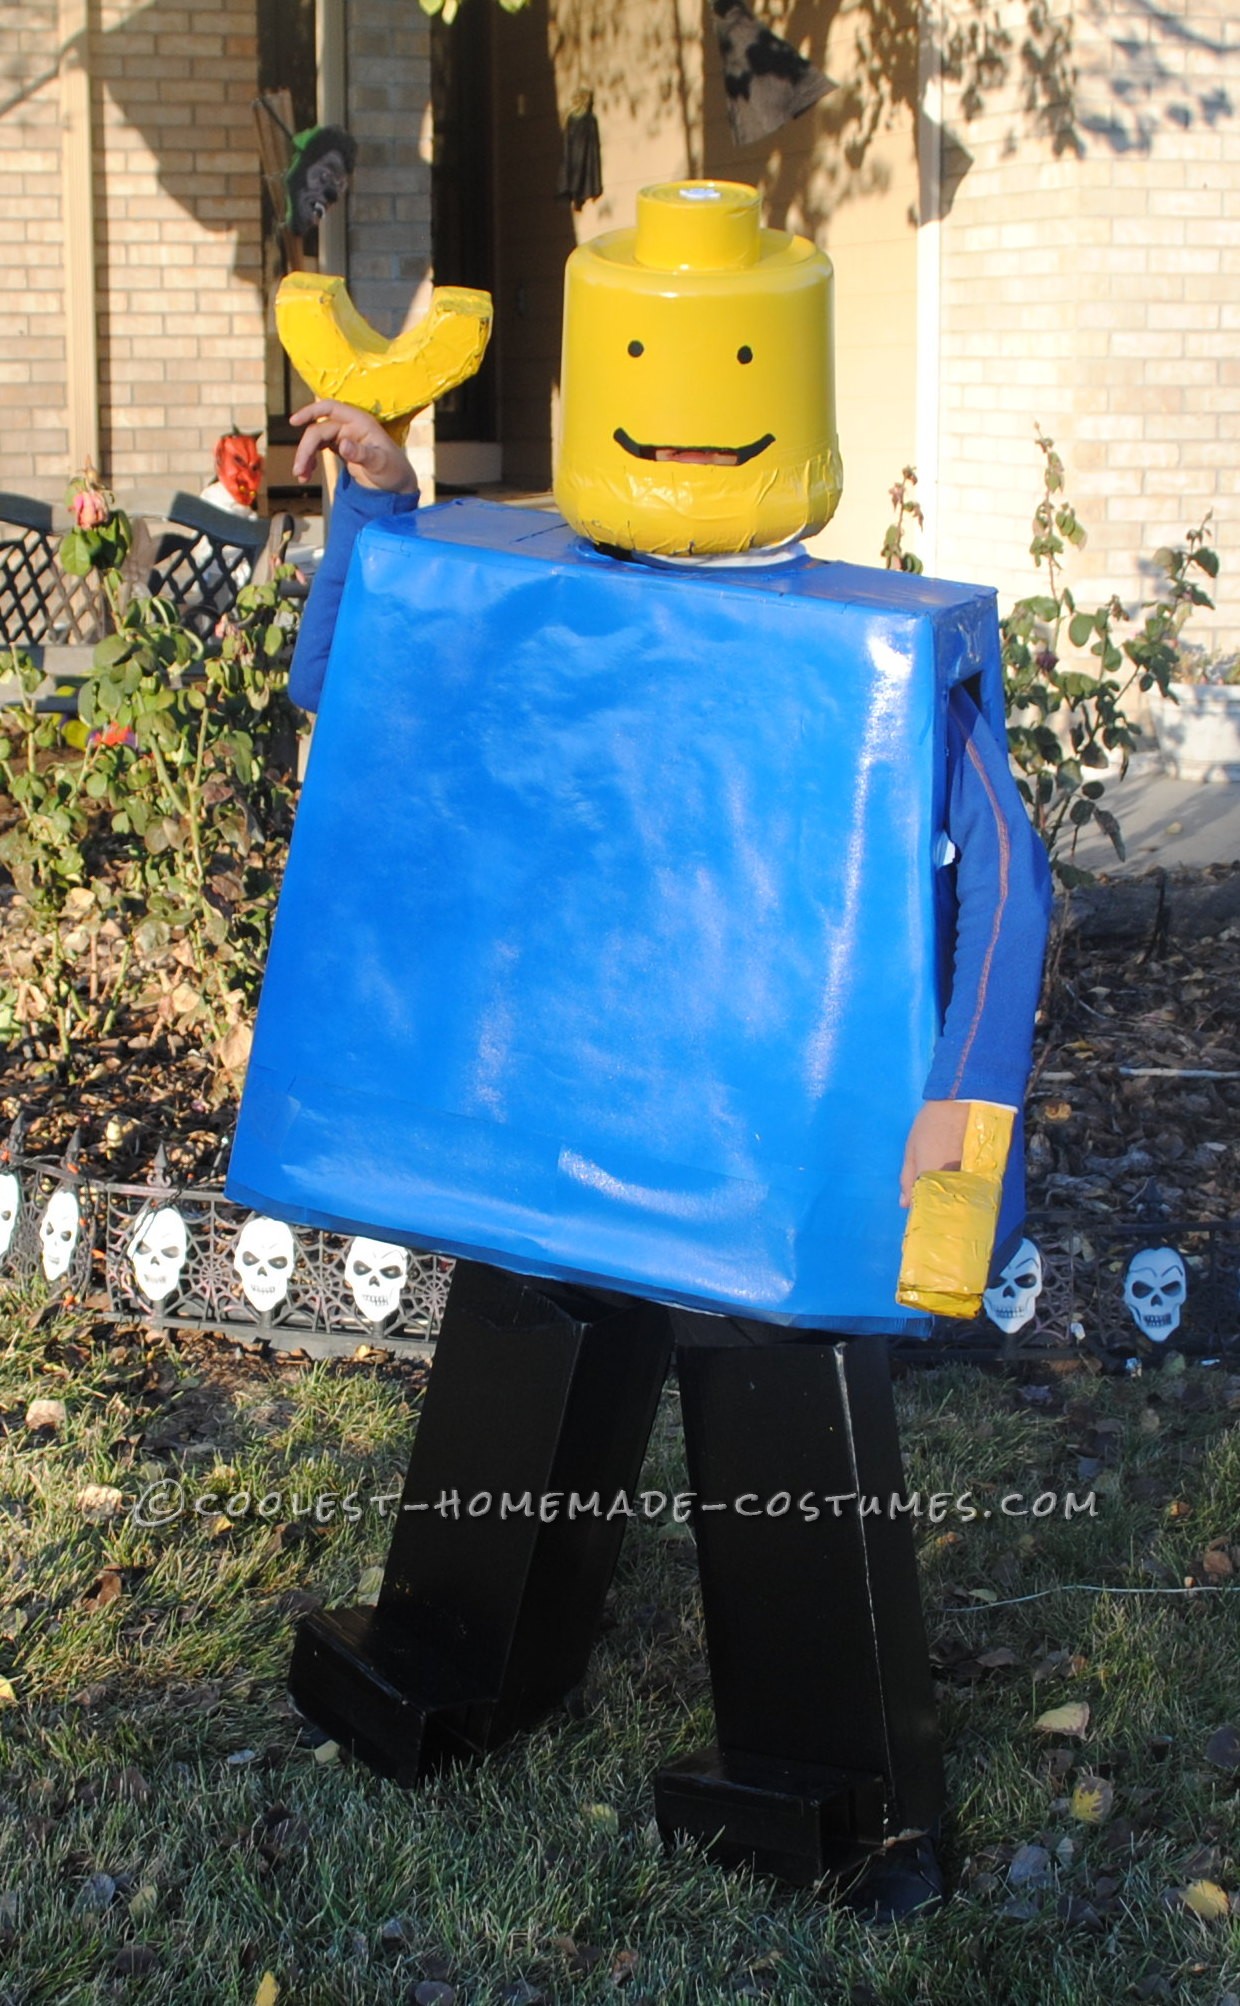 Cardboard Boxes, Yellow and Blue Spray Paint, Plastic Bucket from WalMart and Tuna Can
The hardest part of this costume was getting the head ri